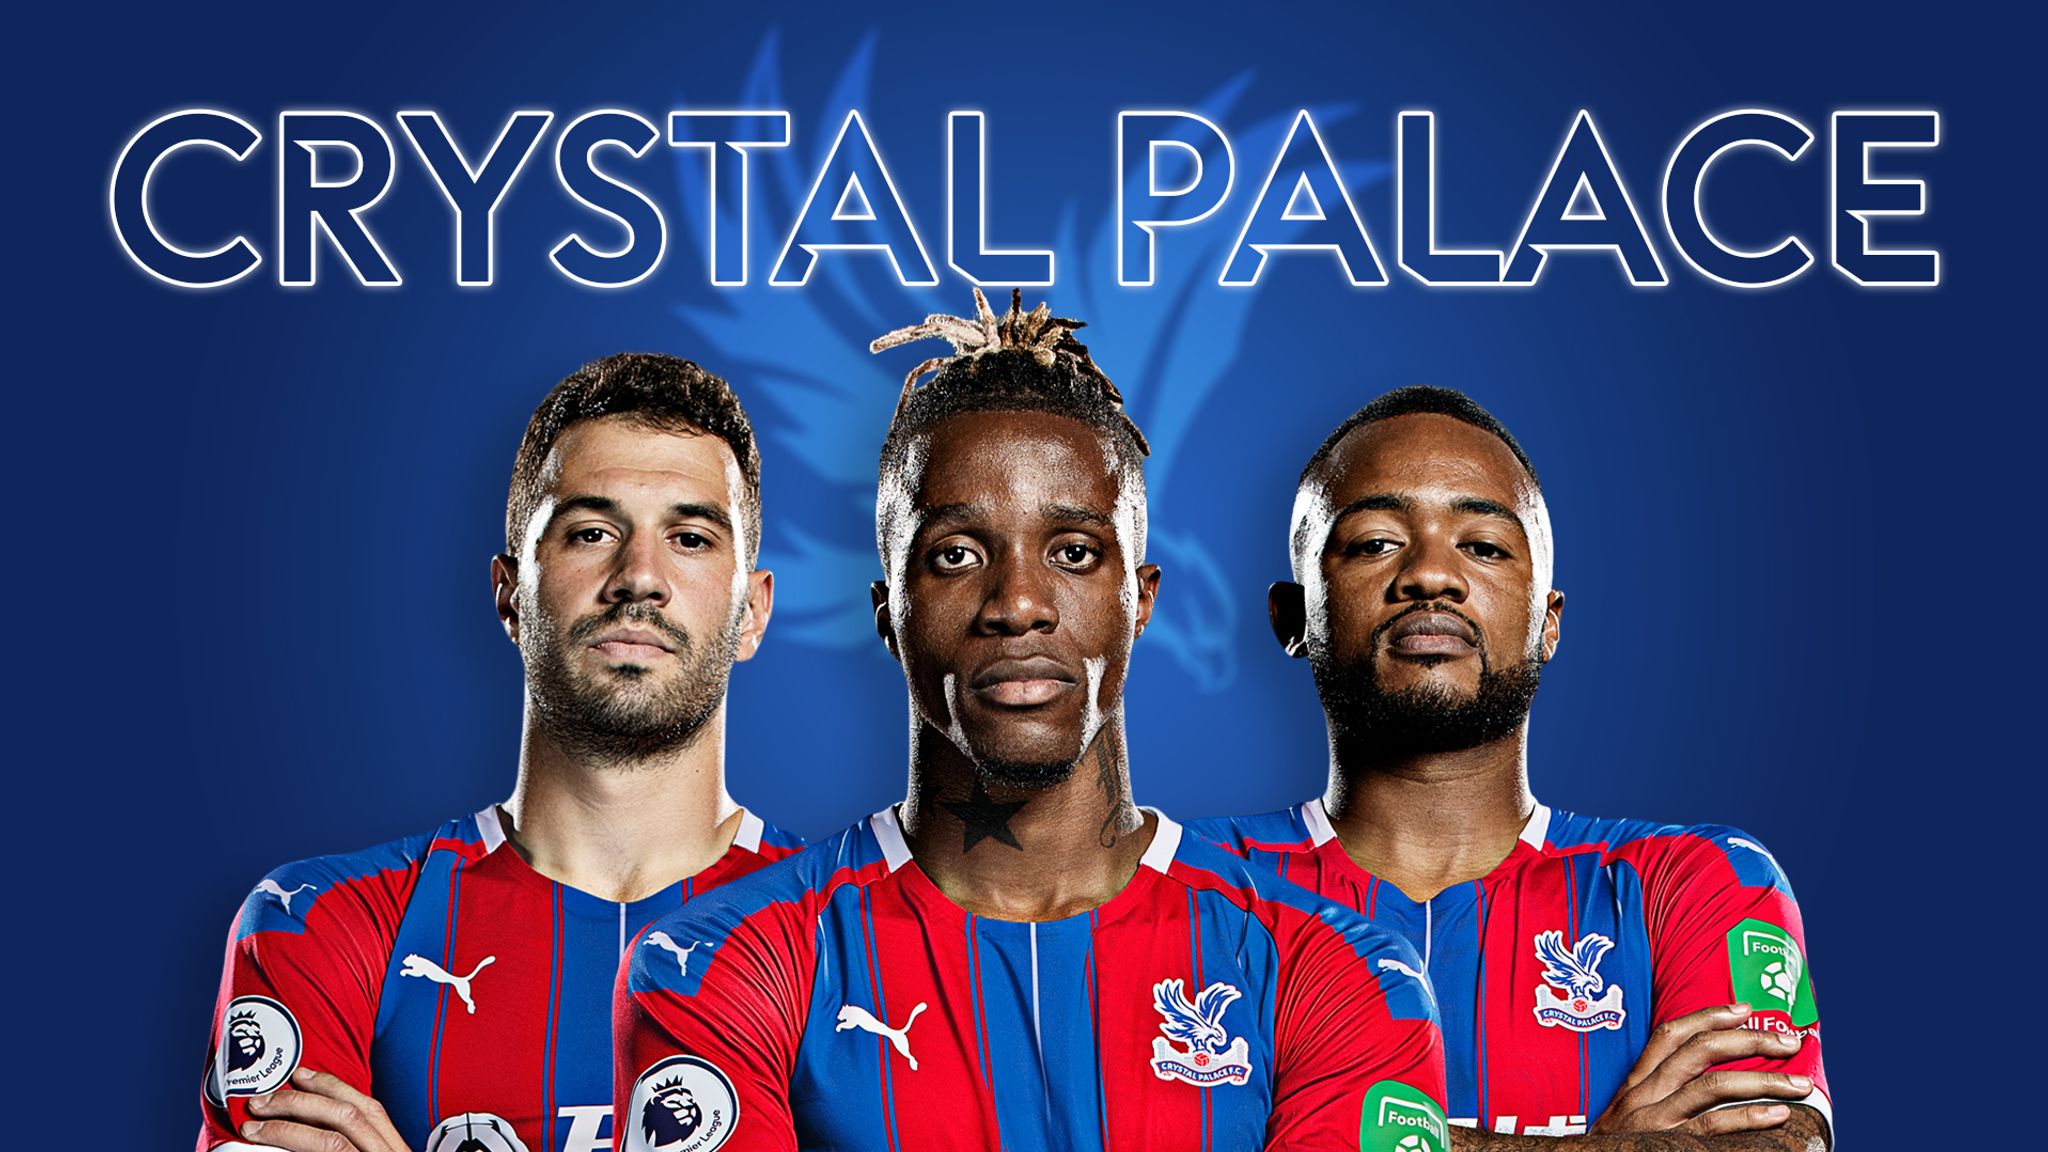 Crystal Palace – The Eagles